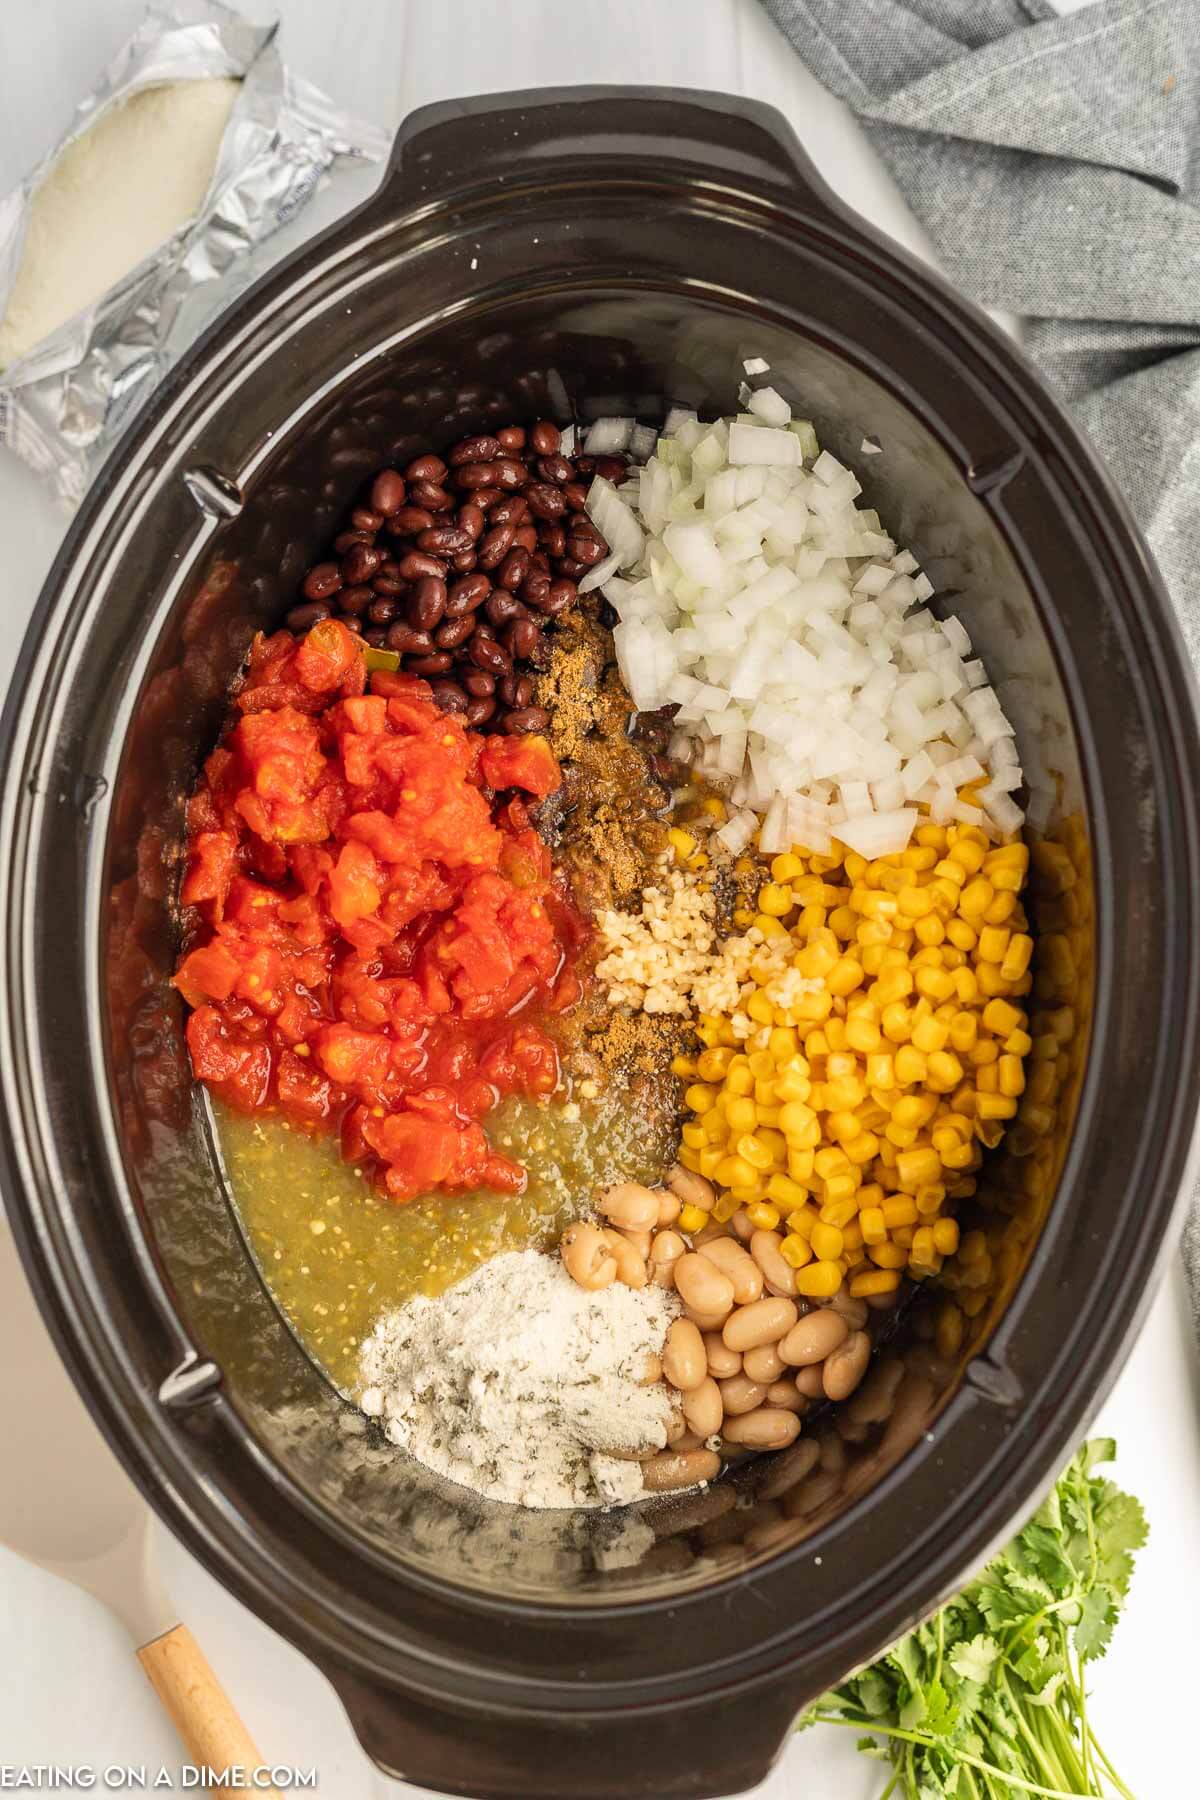 Adding the ingredients to the slow cooker